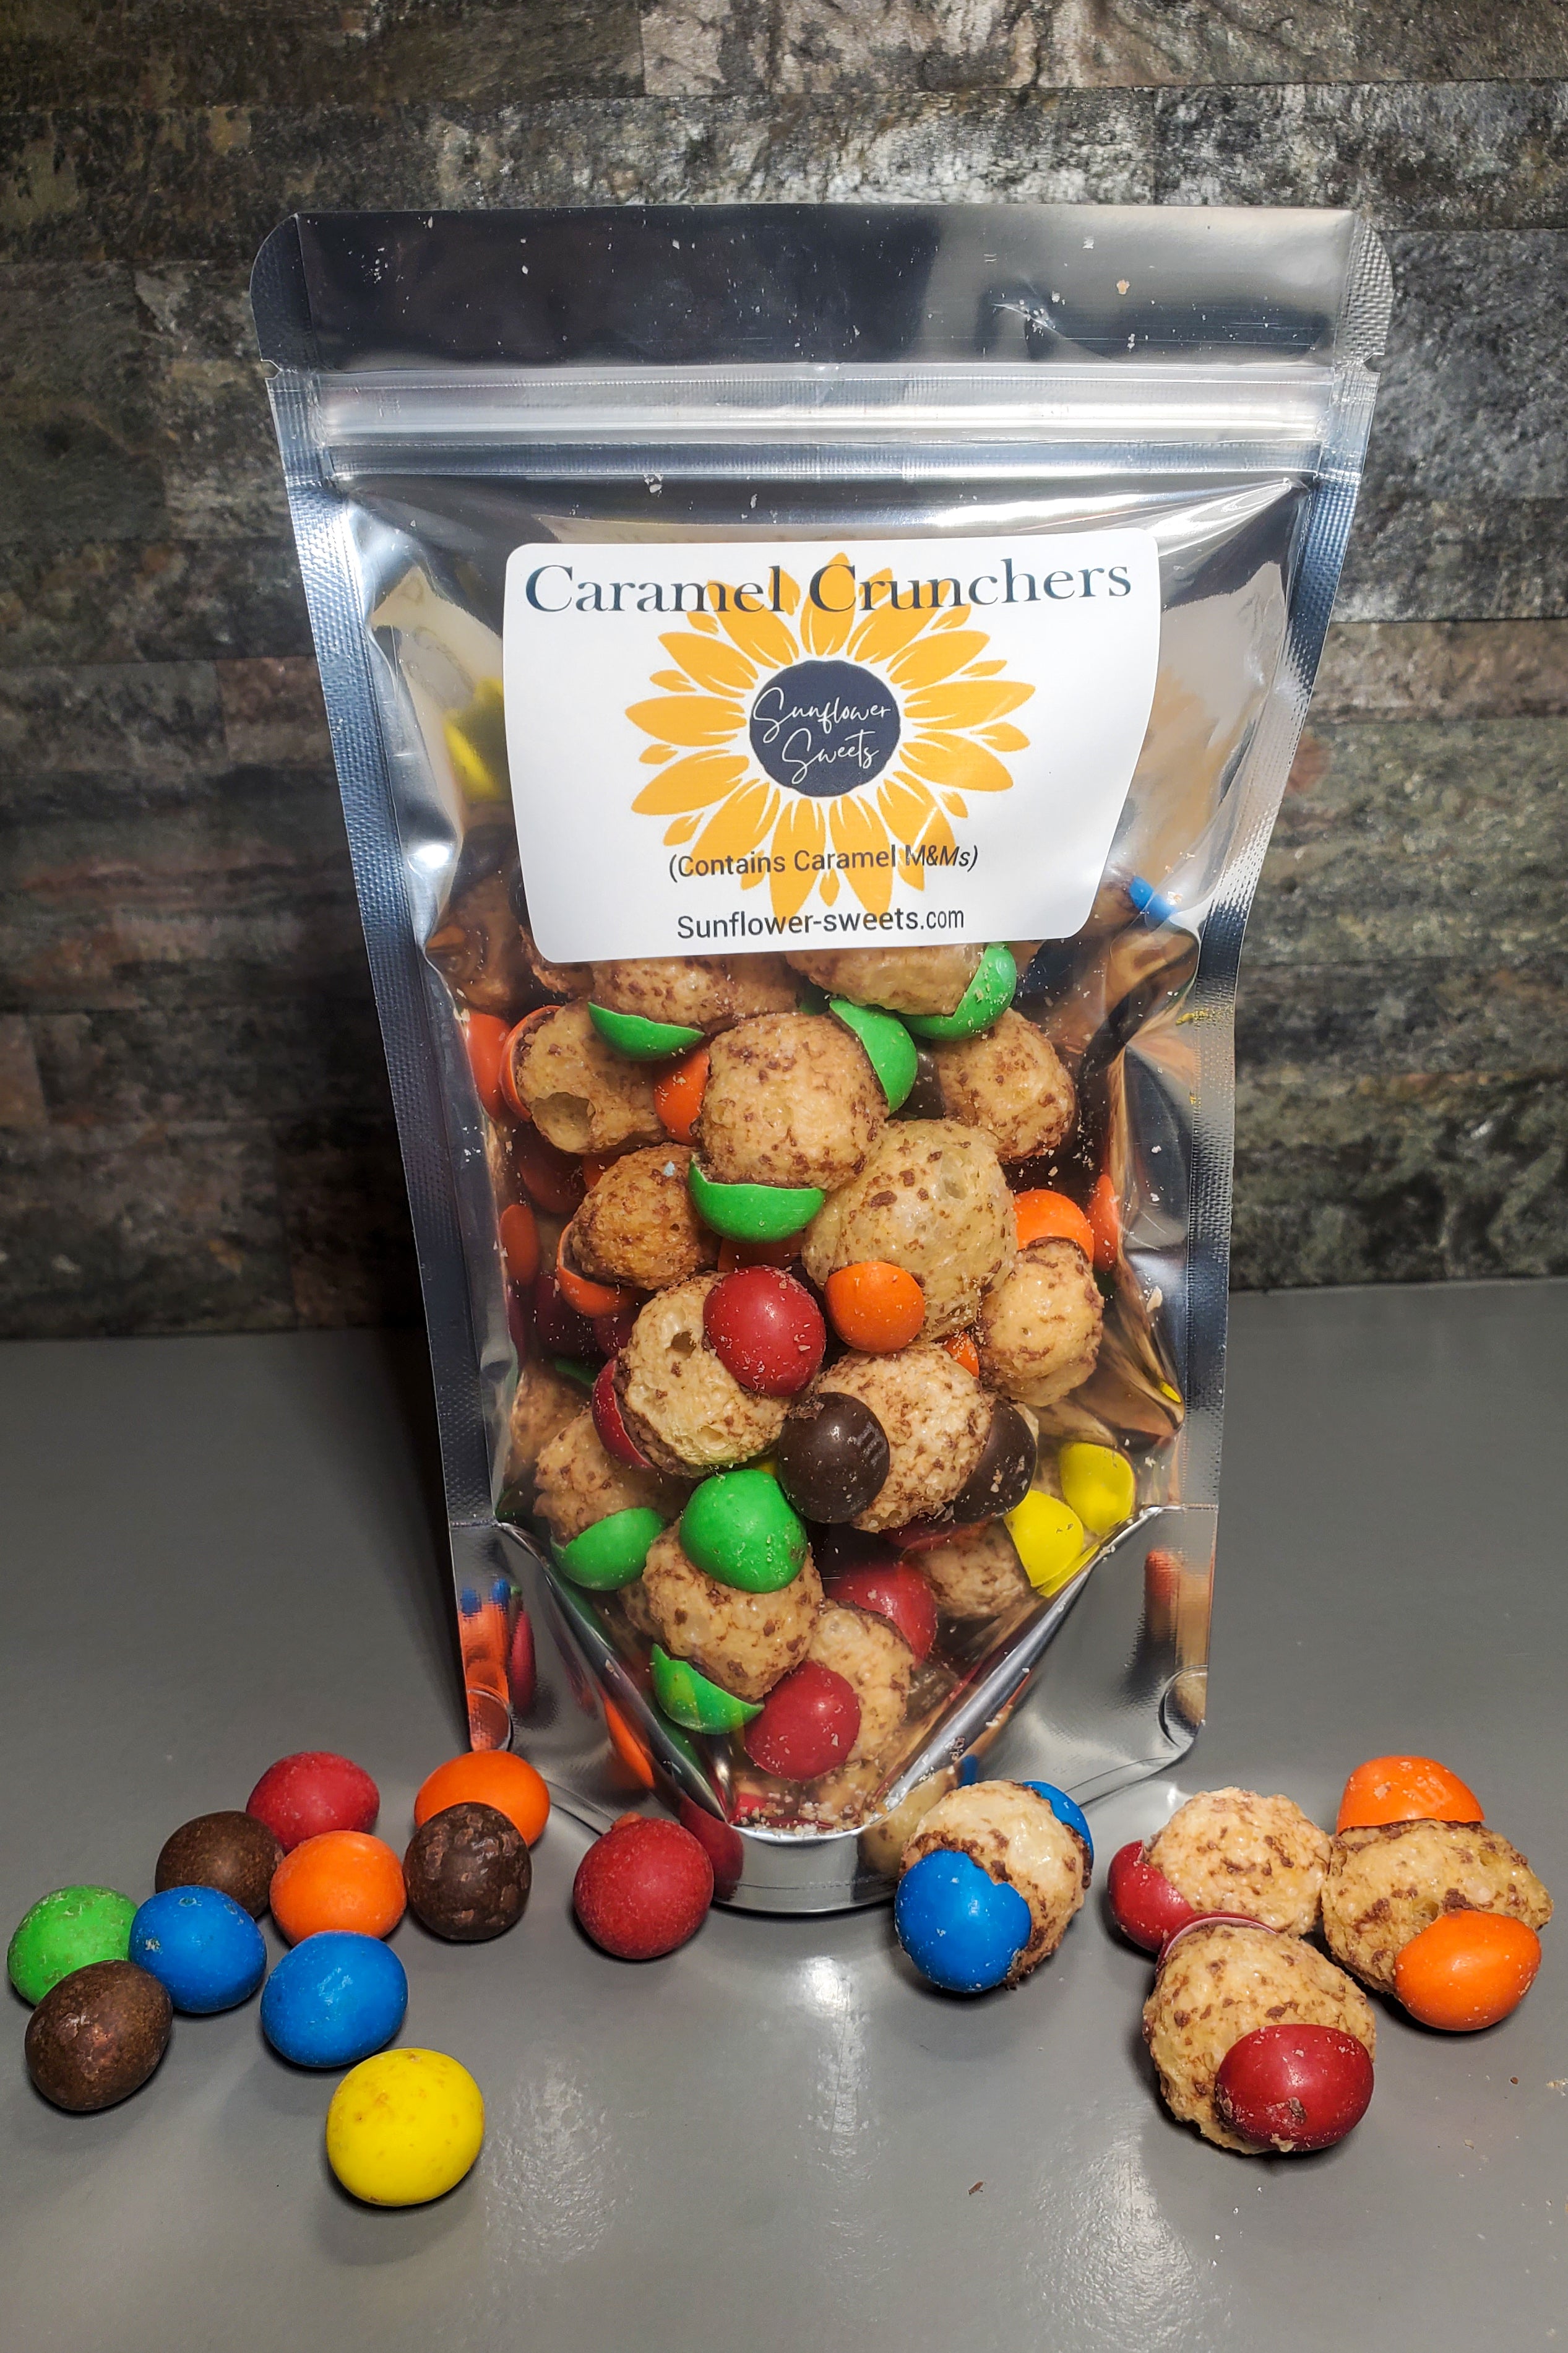 New in food: M&M's Caramel